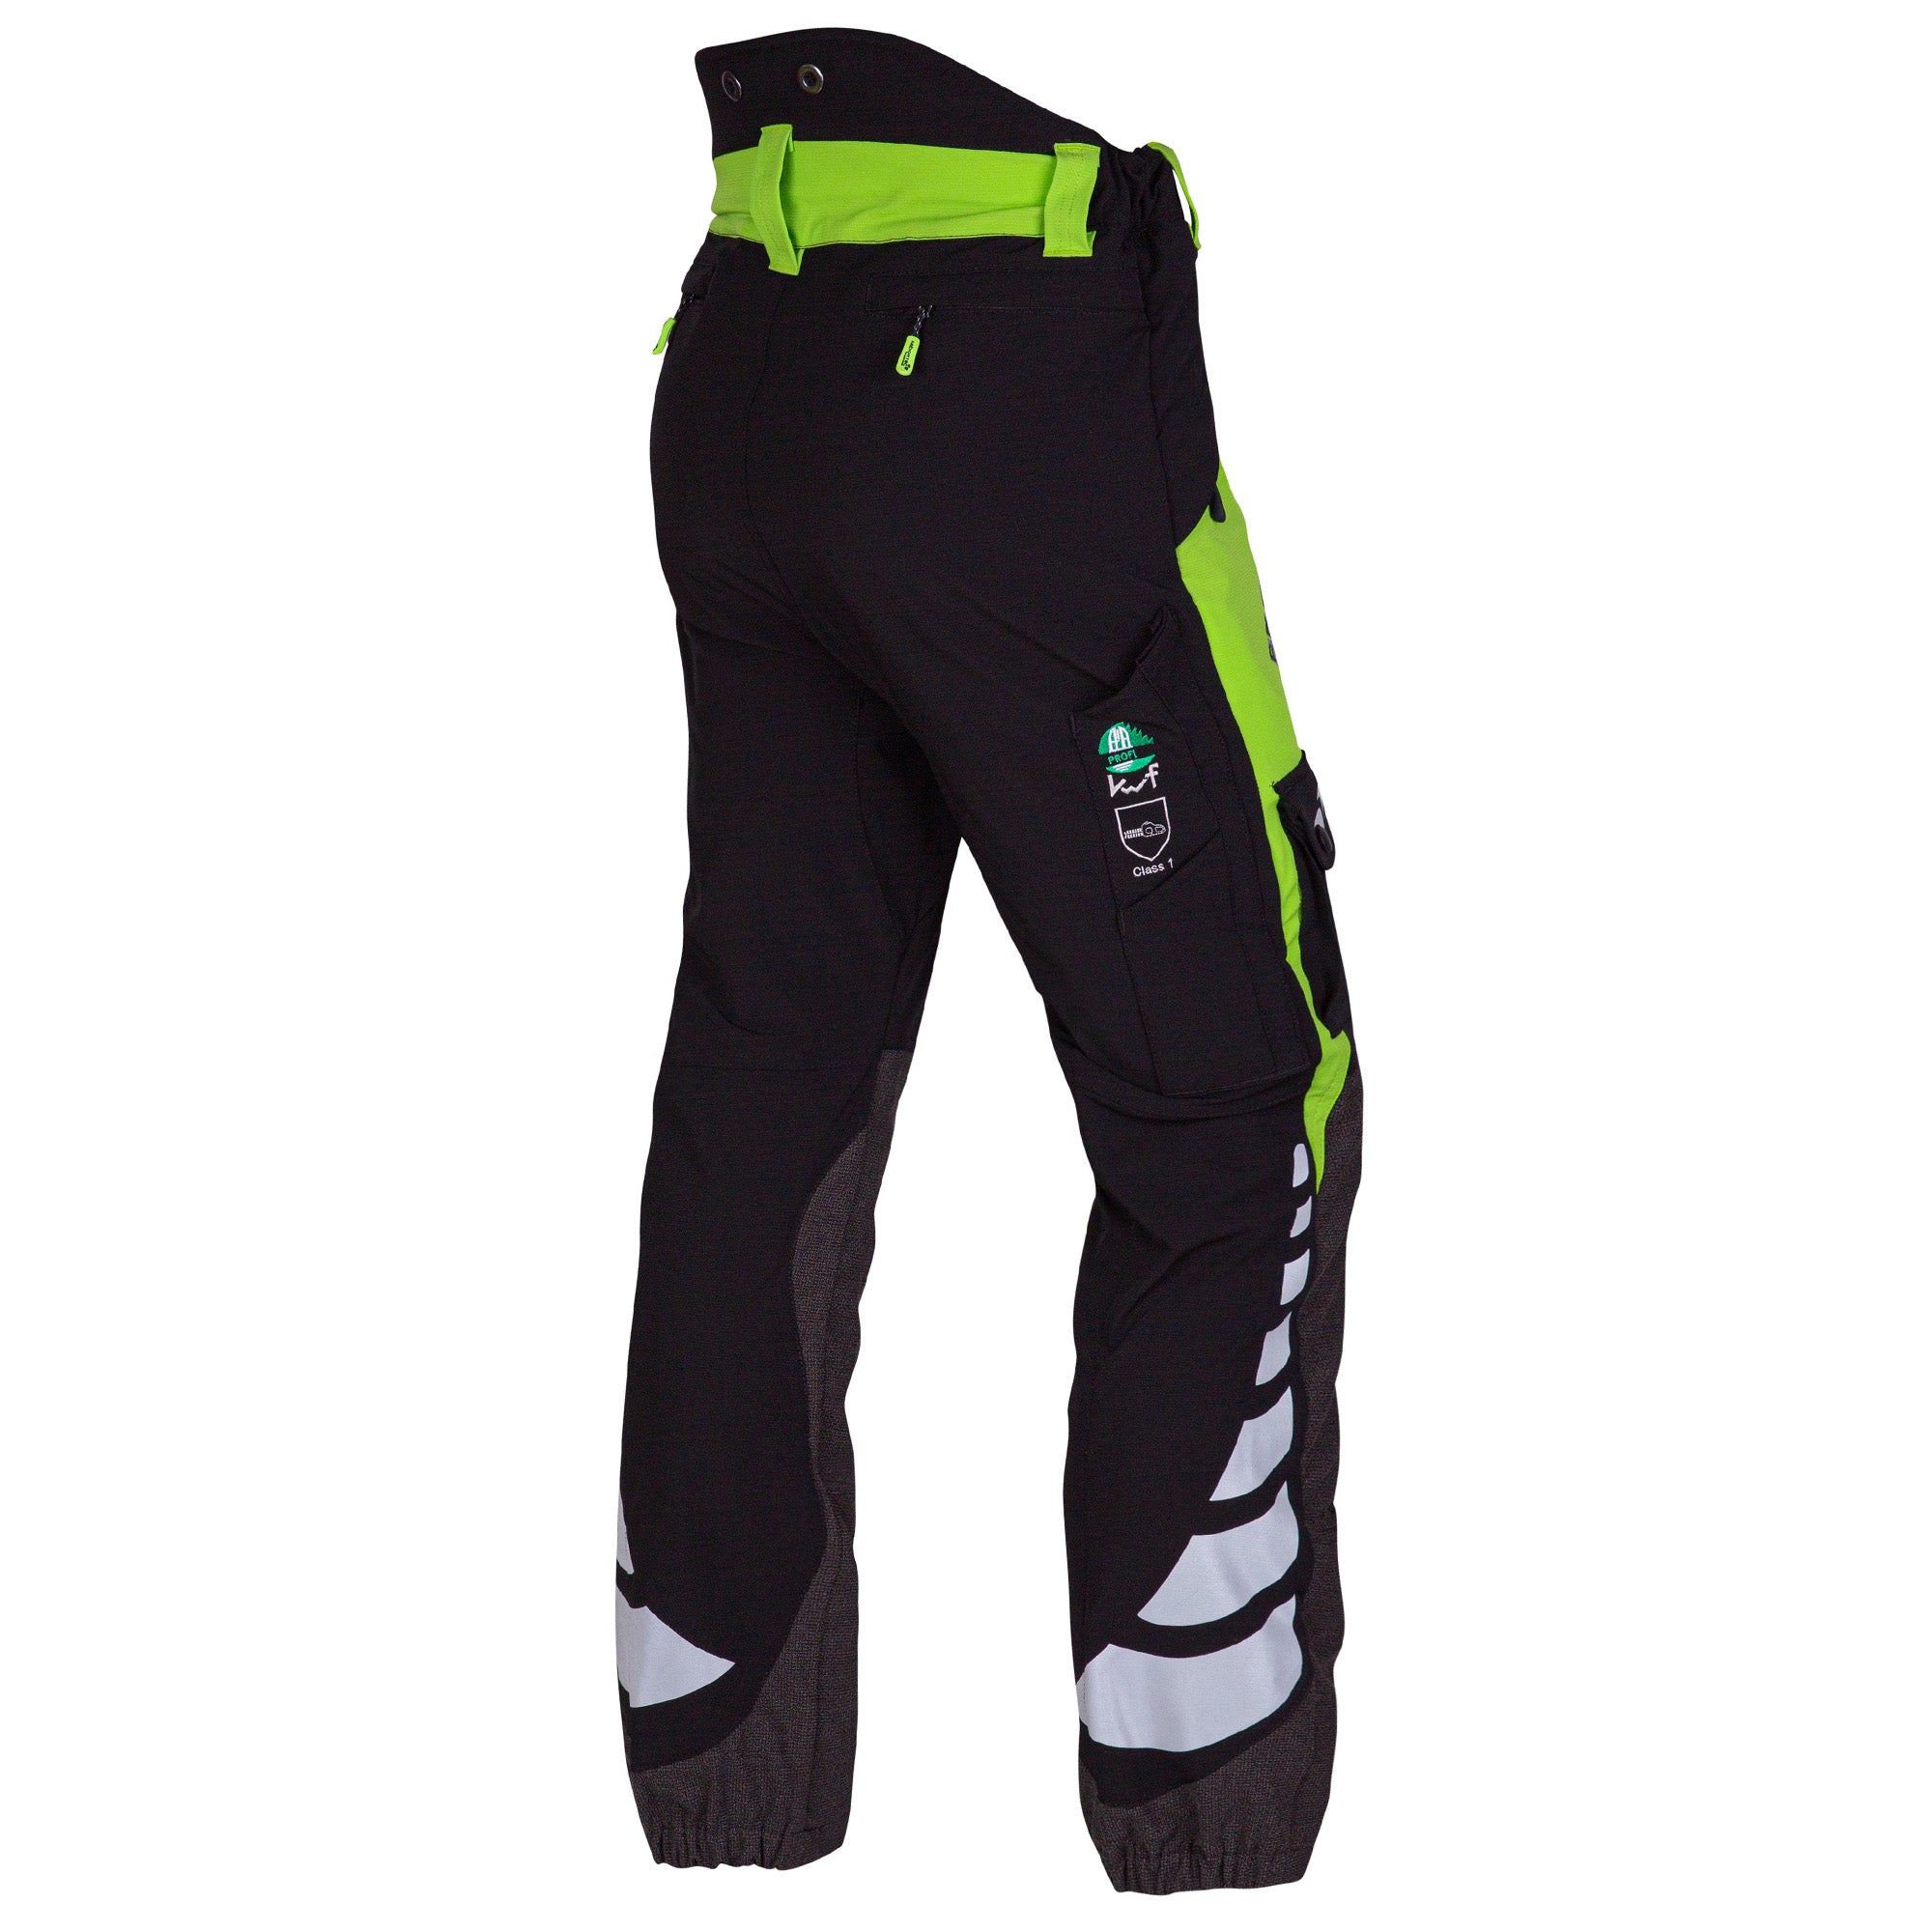 AT4020 Breatheflex Chainsaw Trousers Design A Class 2 - Lime.